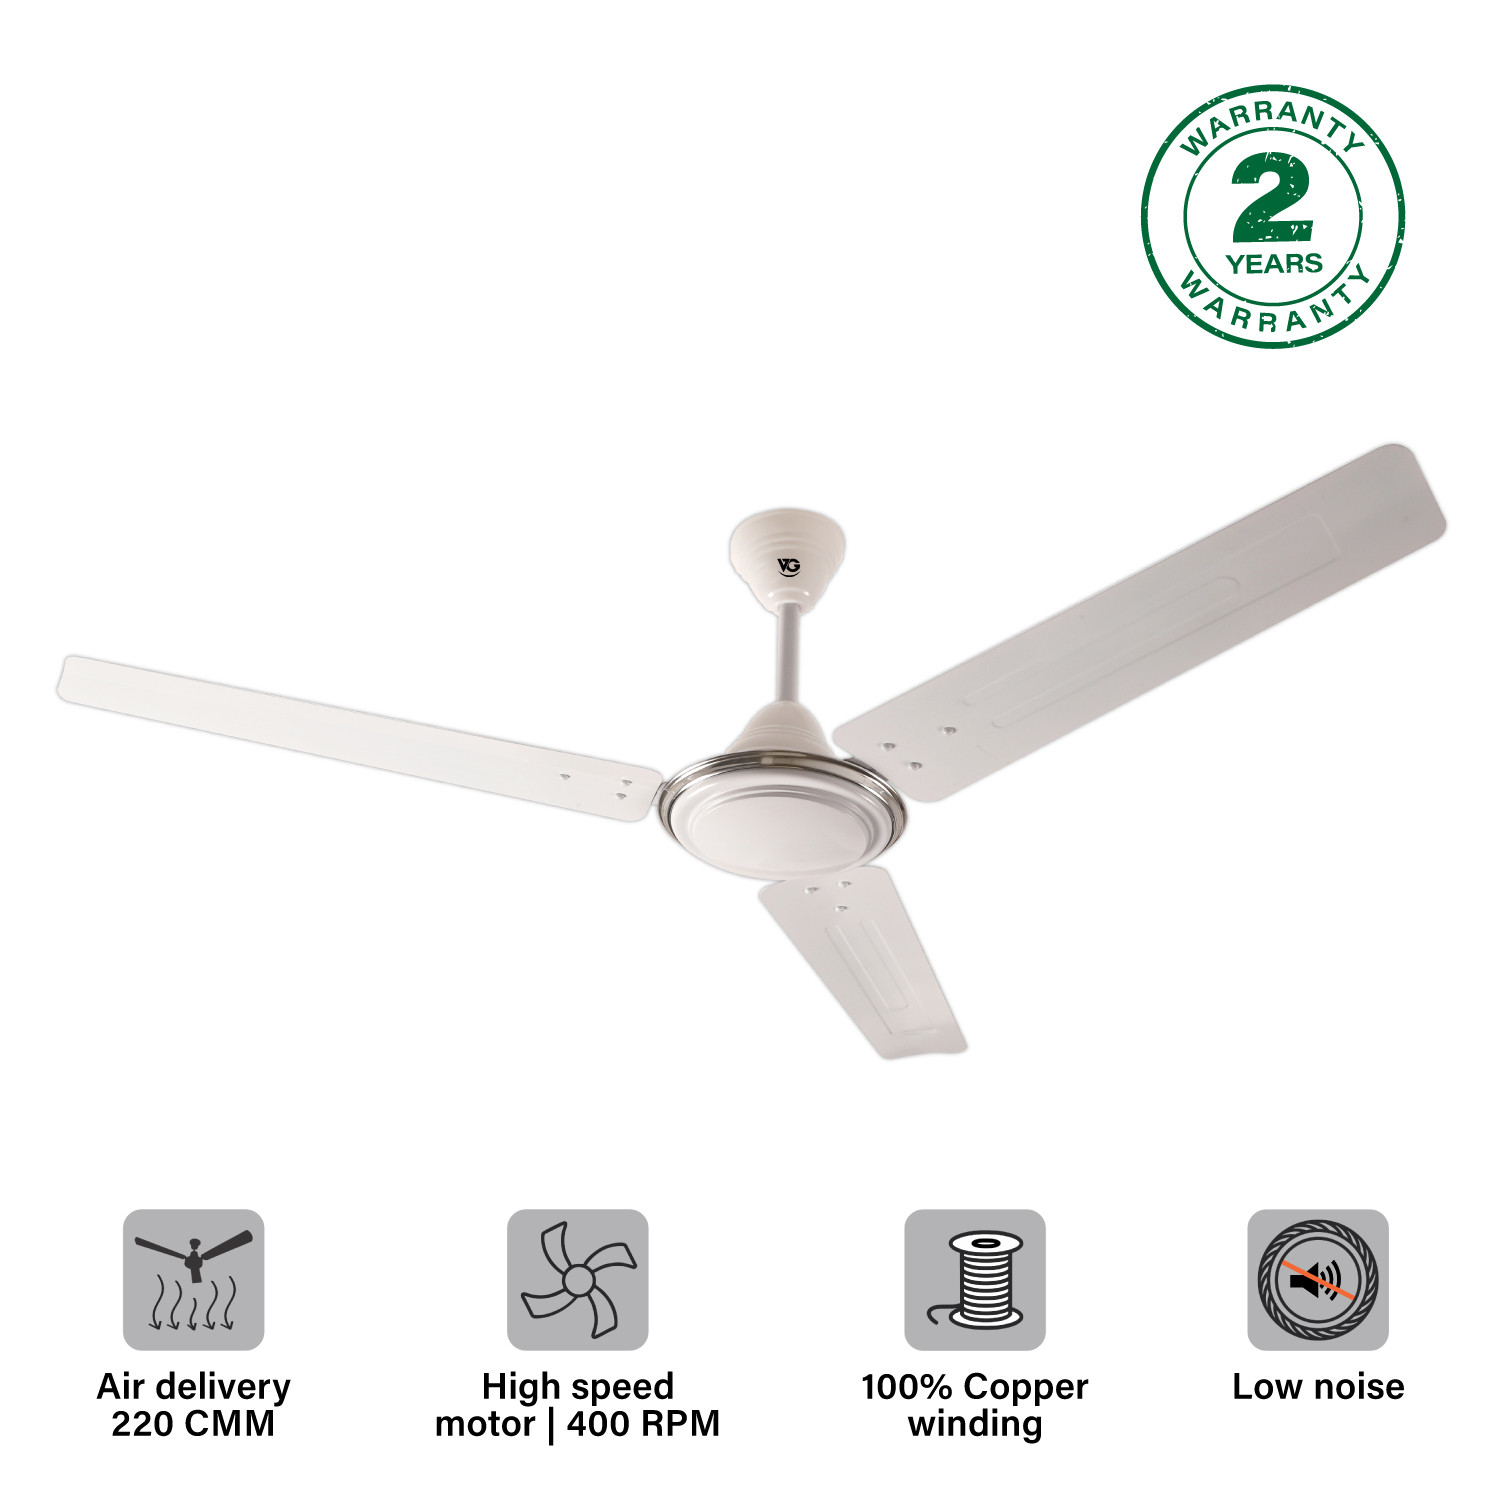 VG Star Breeze 1200 mm 3 Blade Ceiling Fan  (Classic White, Pack of 1)